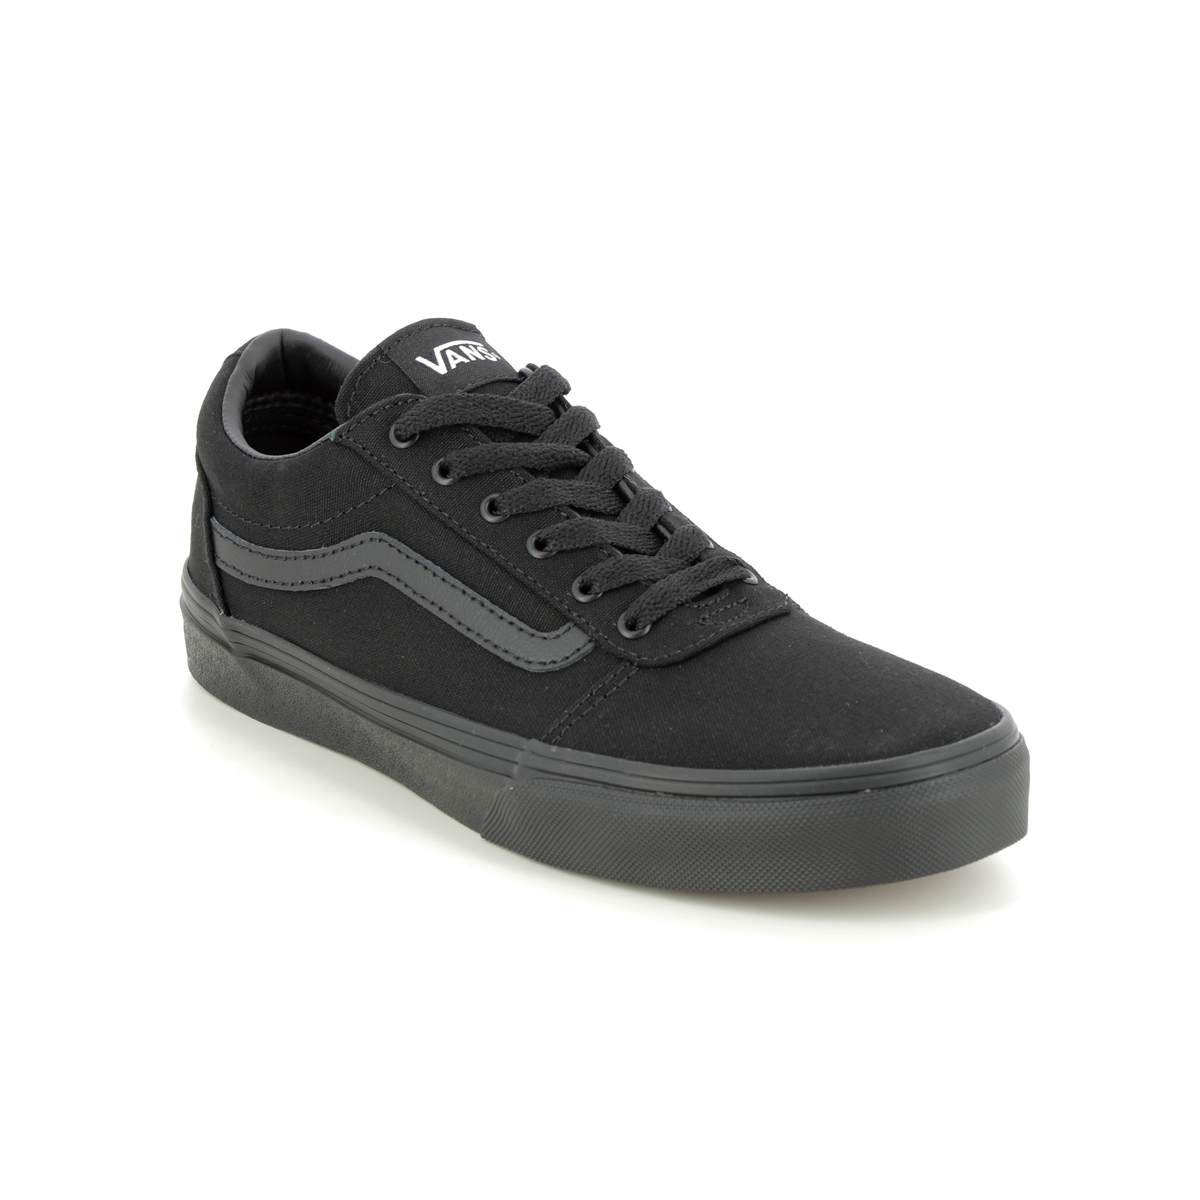 Vans Ward Yth Black Kids Trainers  Vn0A38J91-861 In Size 5 In Plain Black Vans Boys Trainers For kids